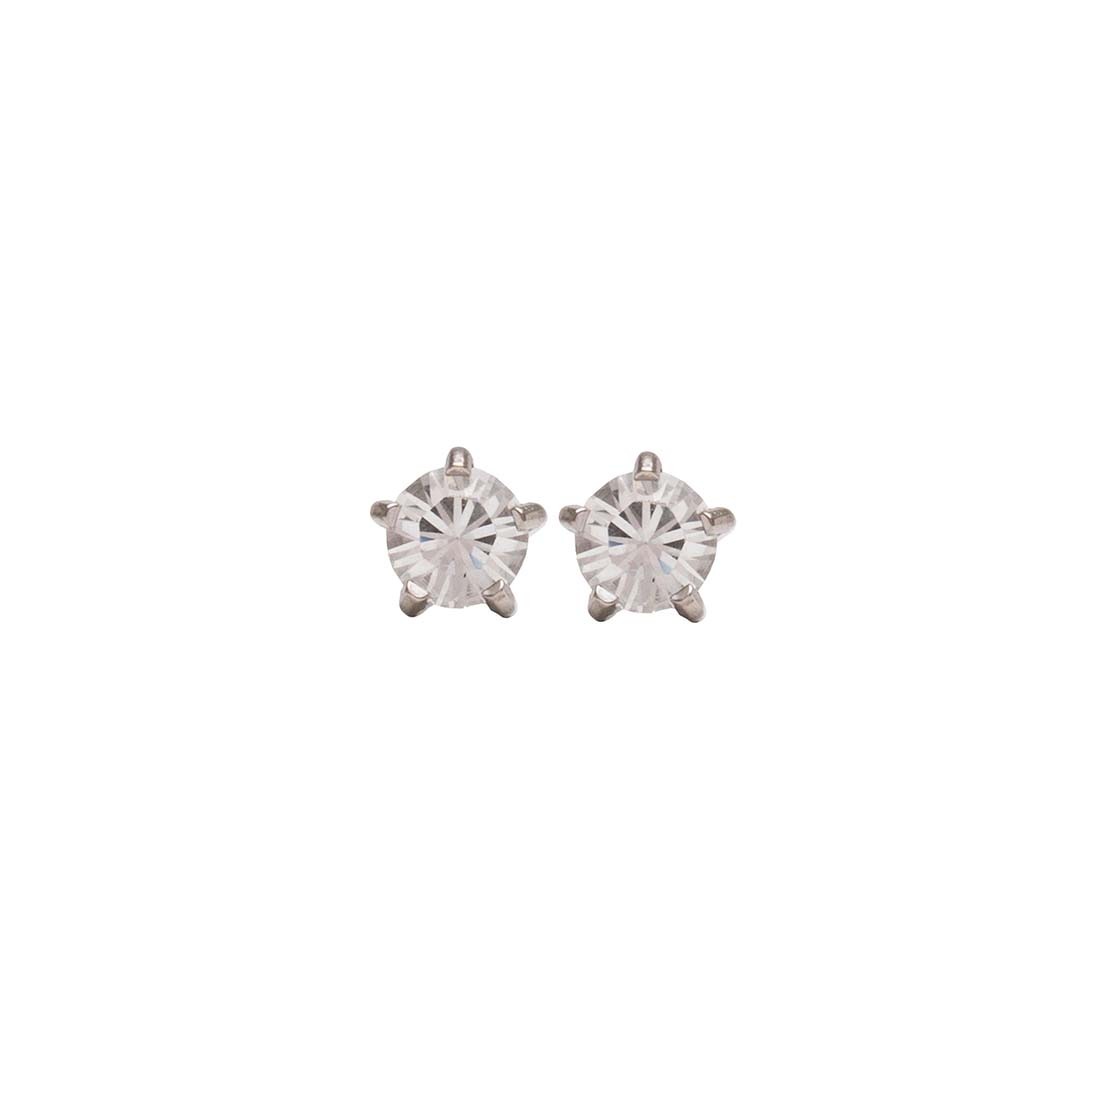 2MM - April Crystal Birthstone (Round) | Stainless Steel Piercing Ear Studs come Fashion Earrings | Studex Select